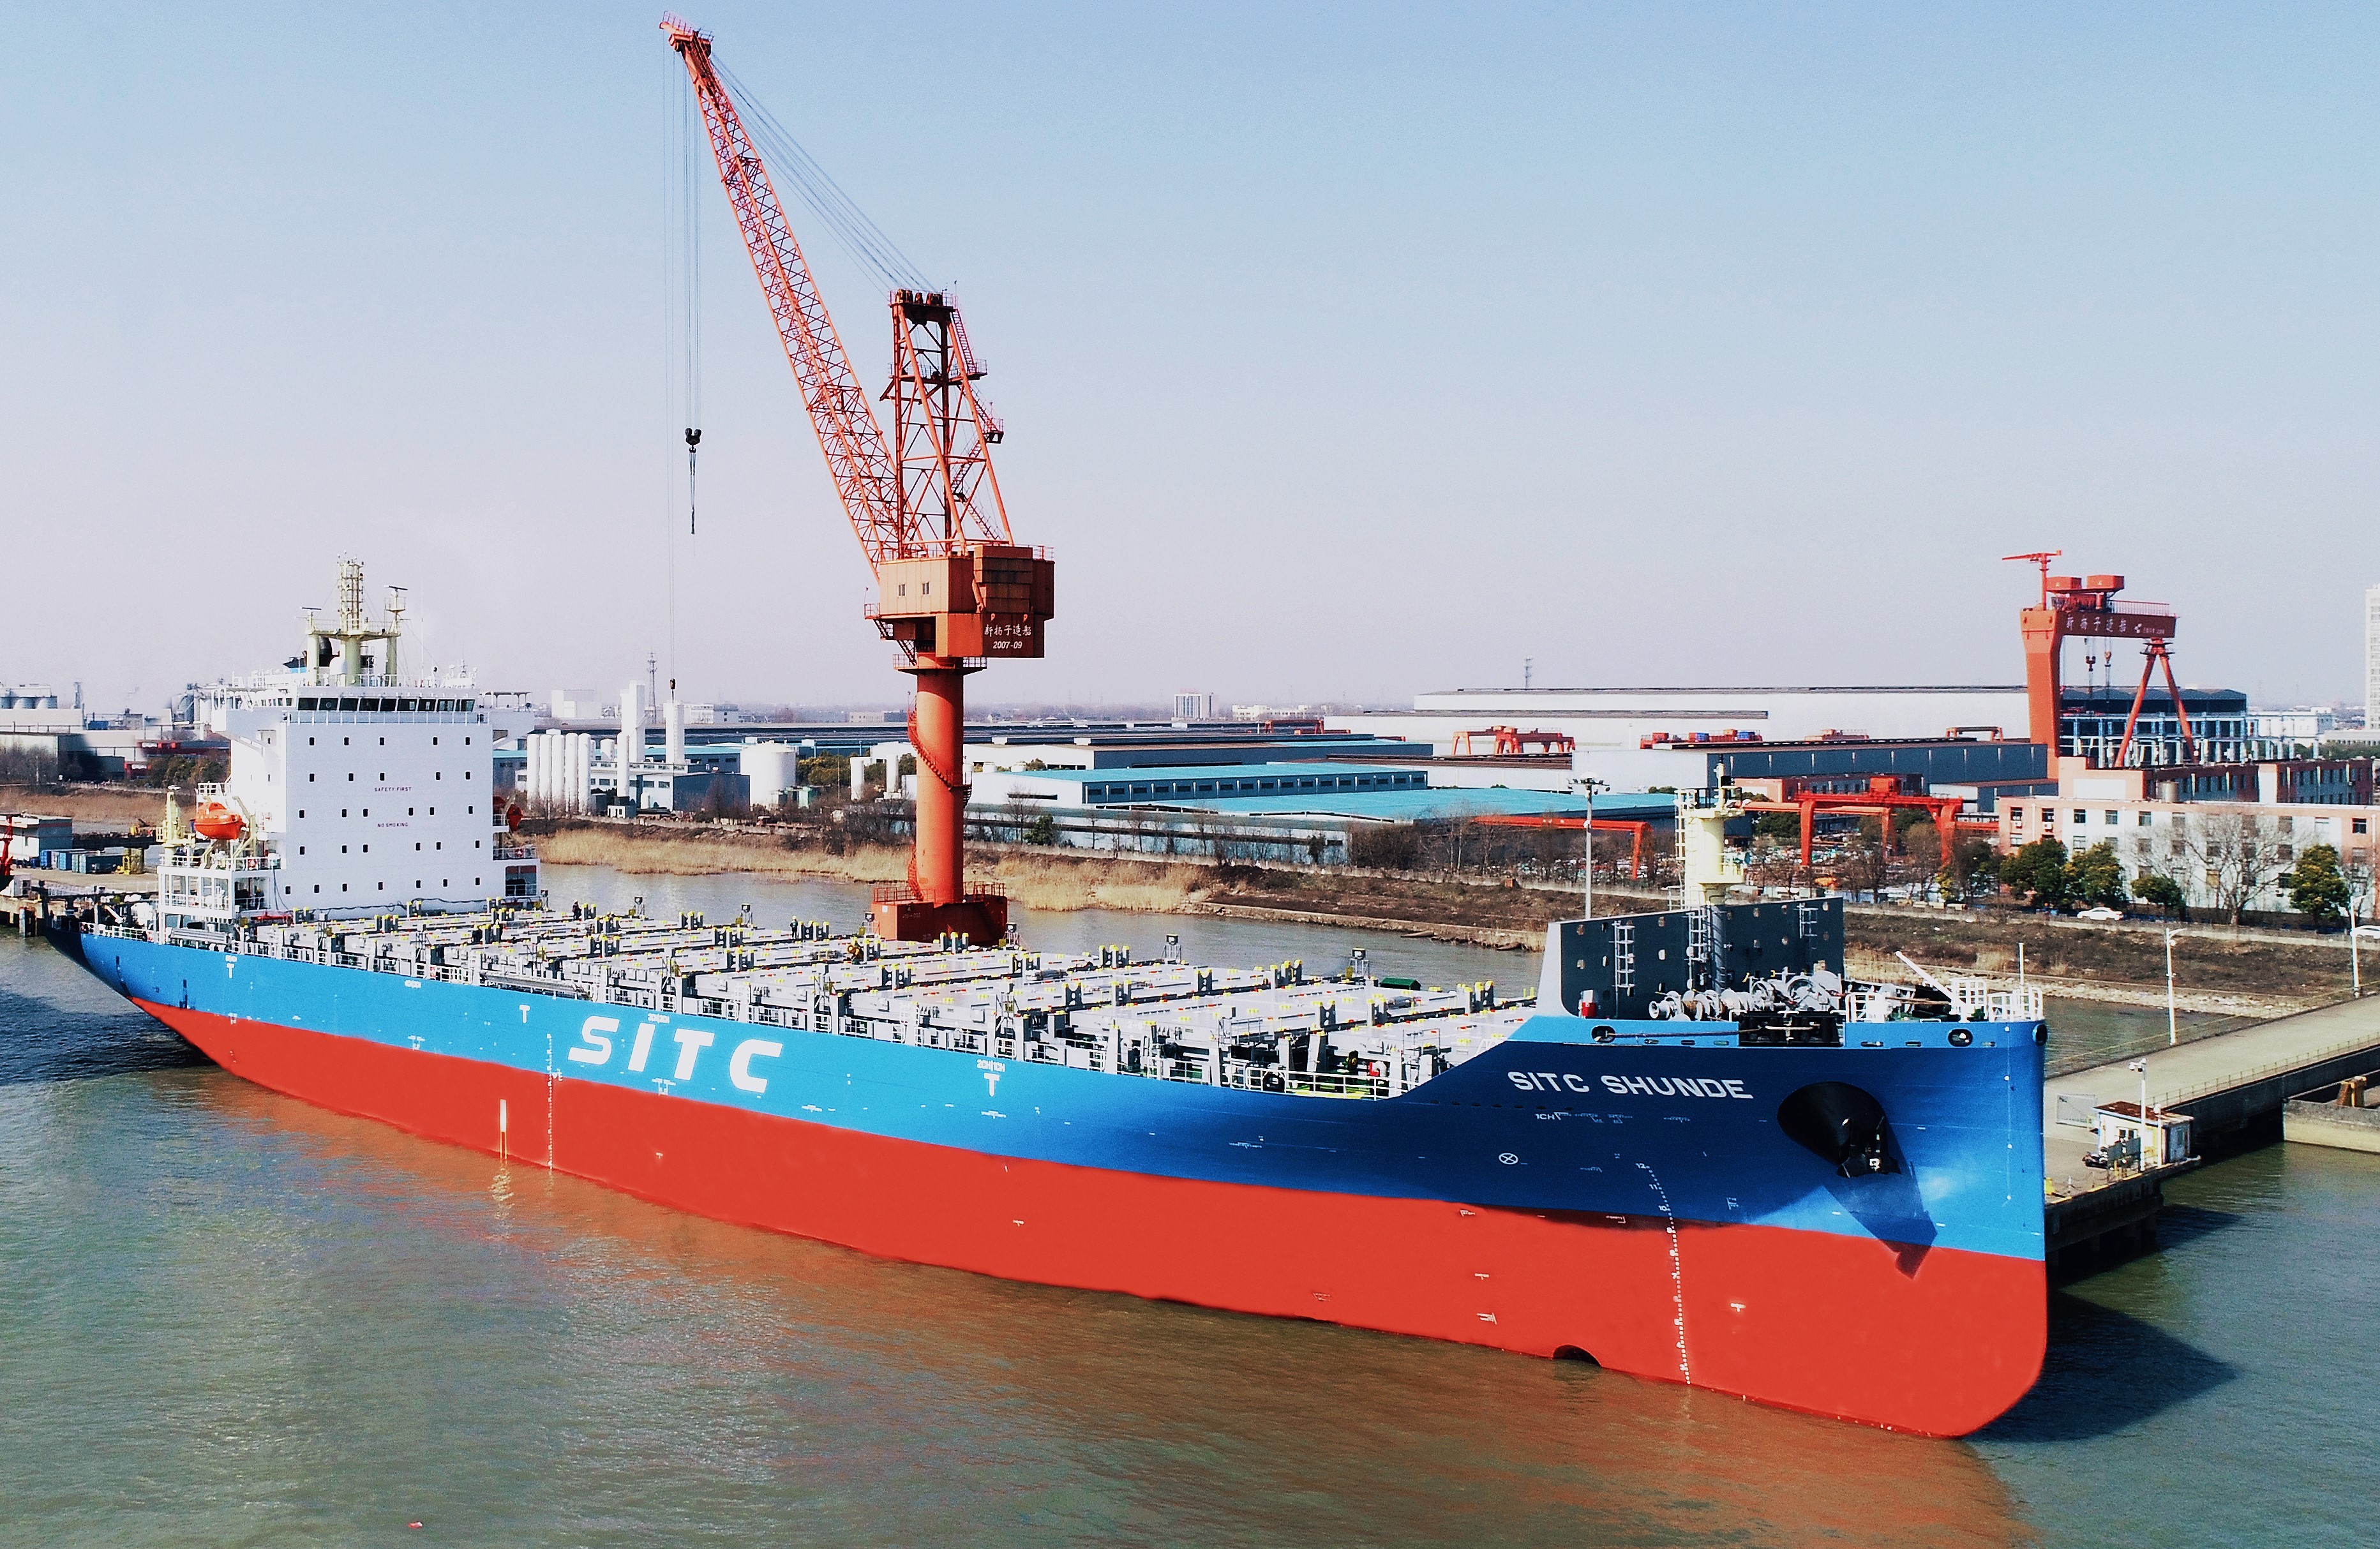 The Successful Delivery for M/V “SITC SHUNDE